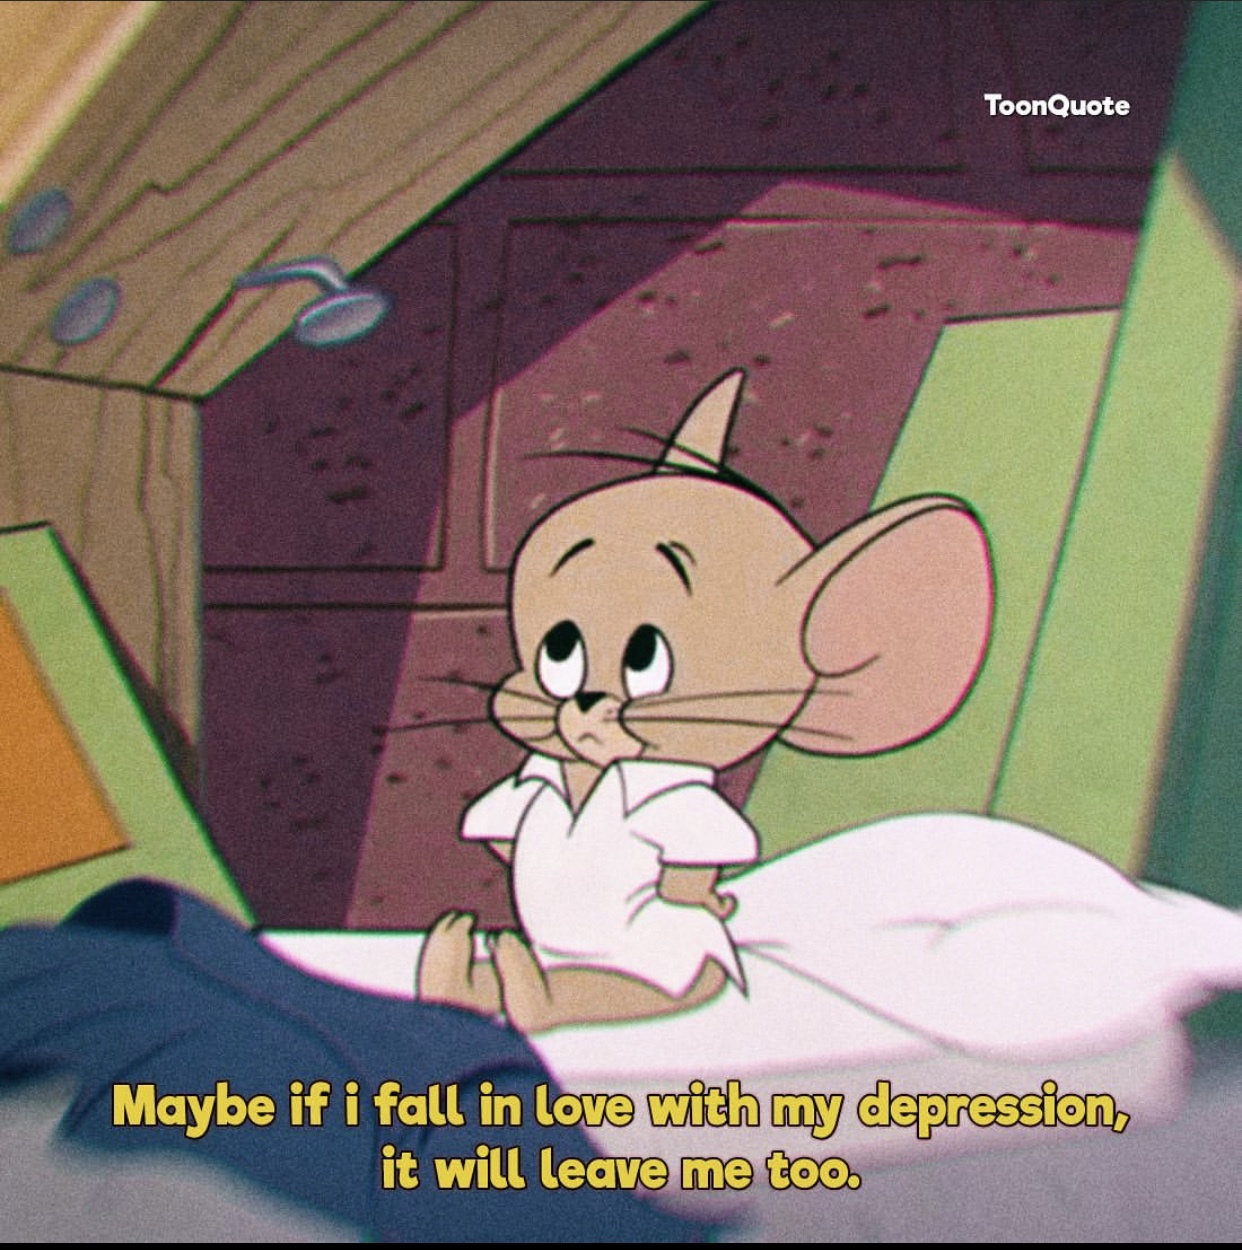 ToonQuote Maybe if i fall in love with my depression, it will leave me too.